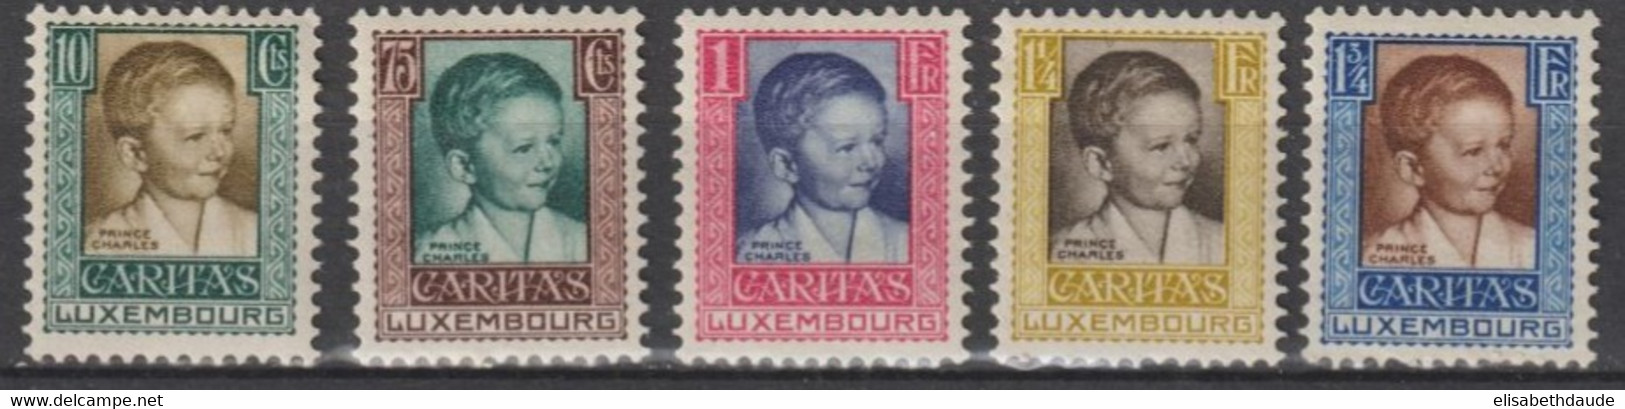 1930 - LUXEMBOURG - YVERT N°226/230 * MLH - COTE = 20 EUR. - Nuevos